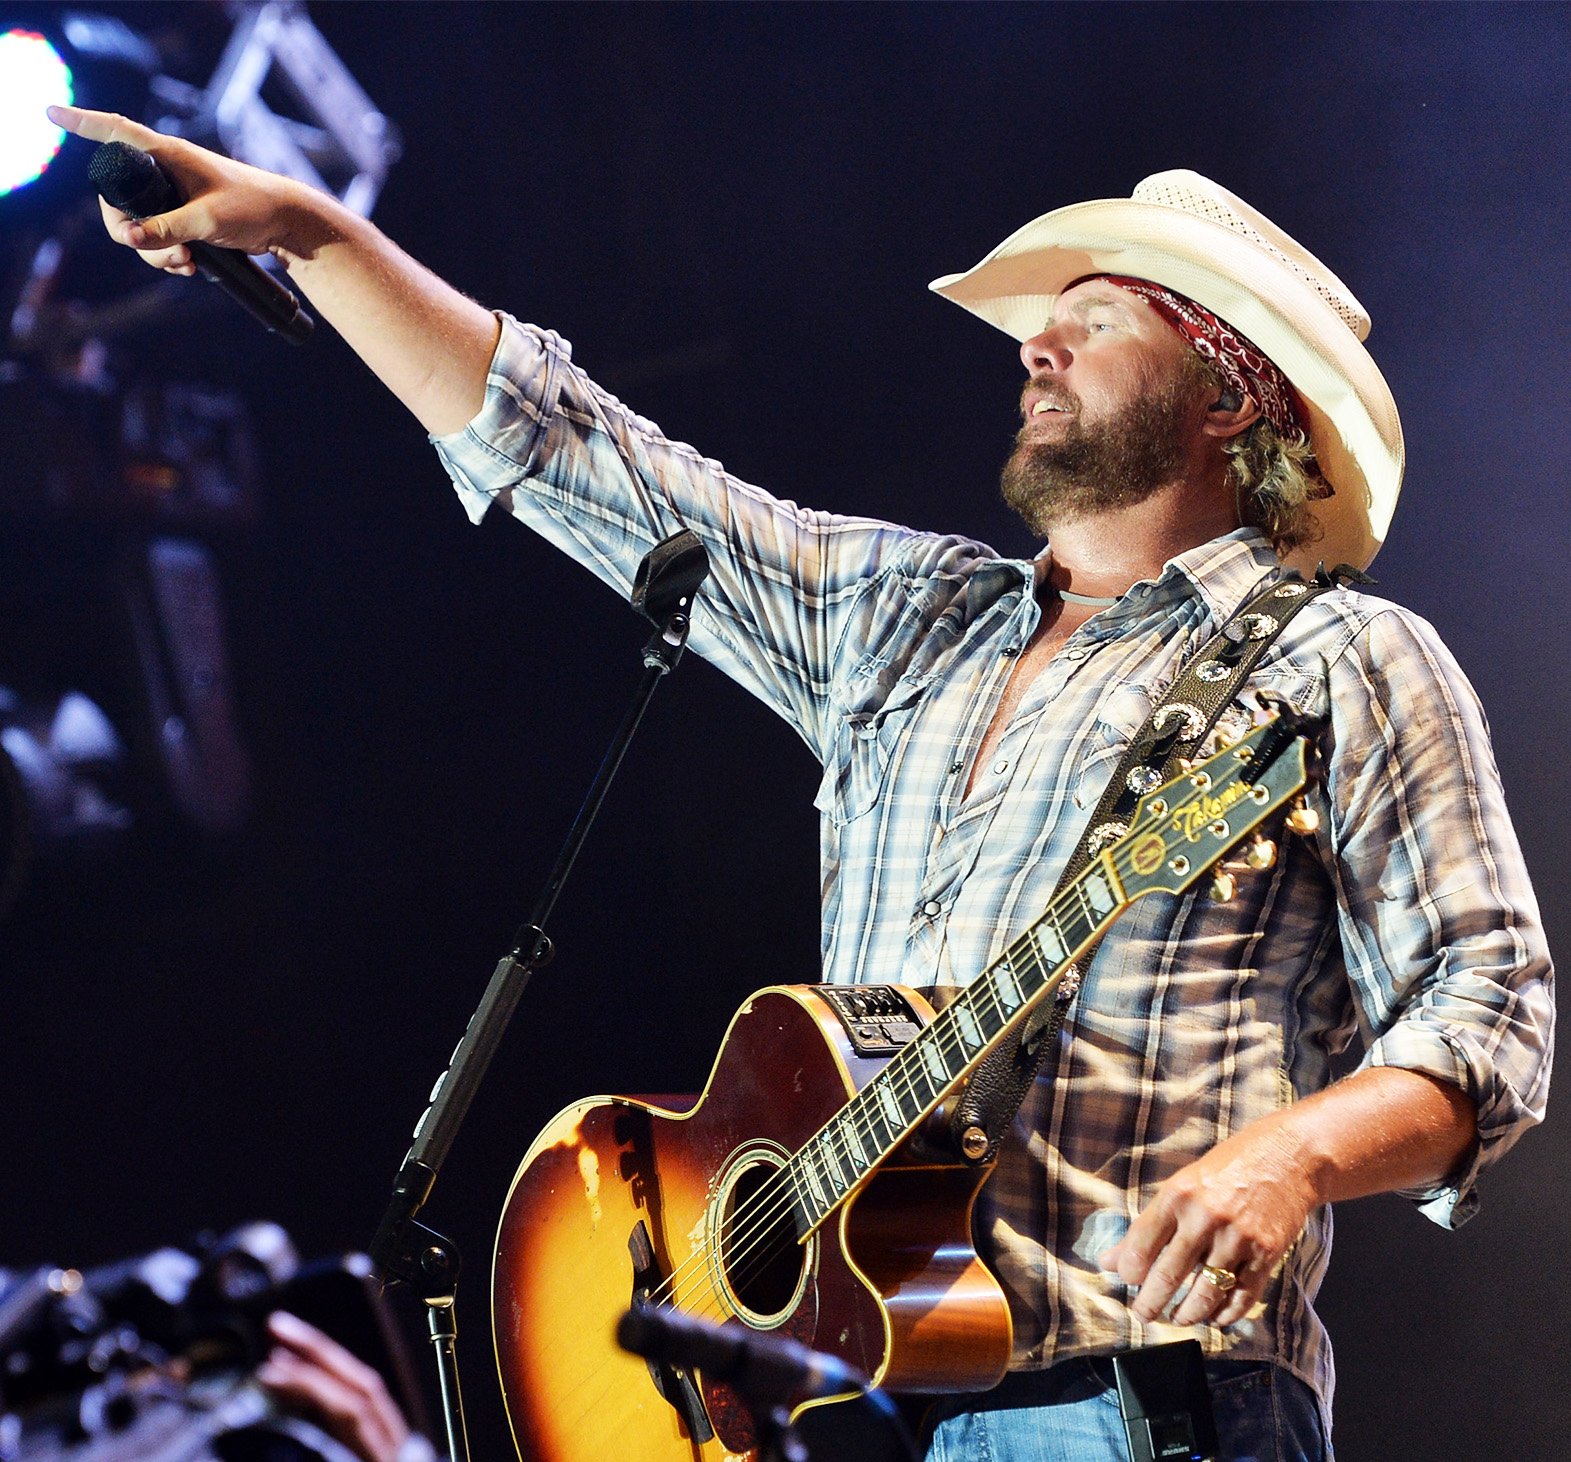 Toby Keith Was Voted Into Country Music Hall of Fame 1 Day After His Death